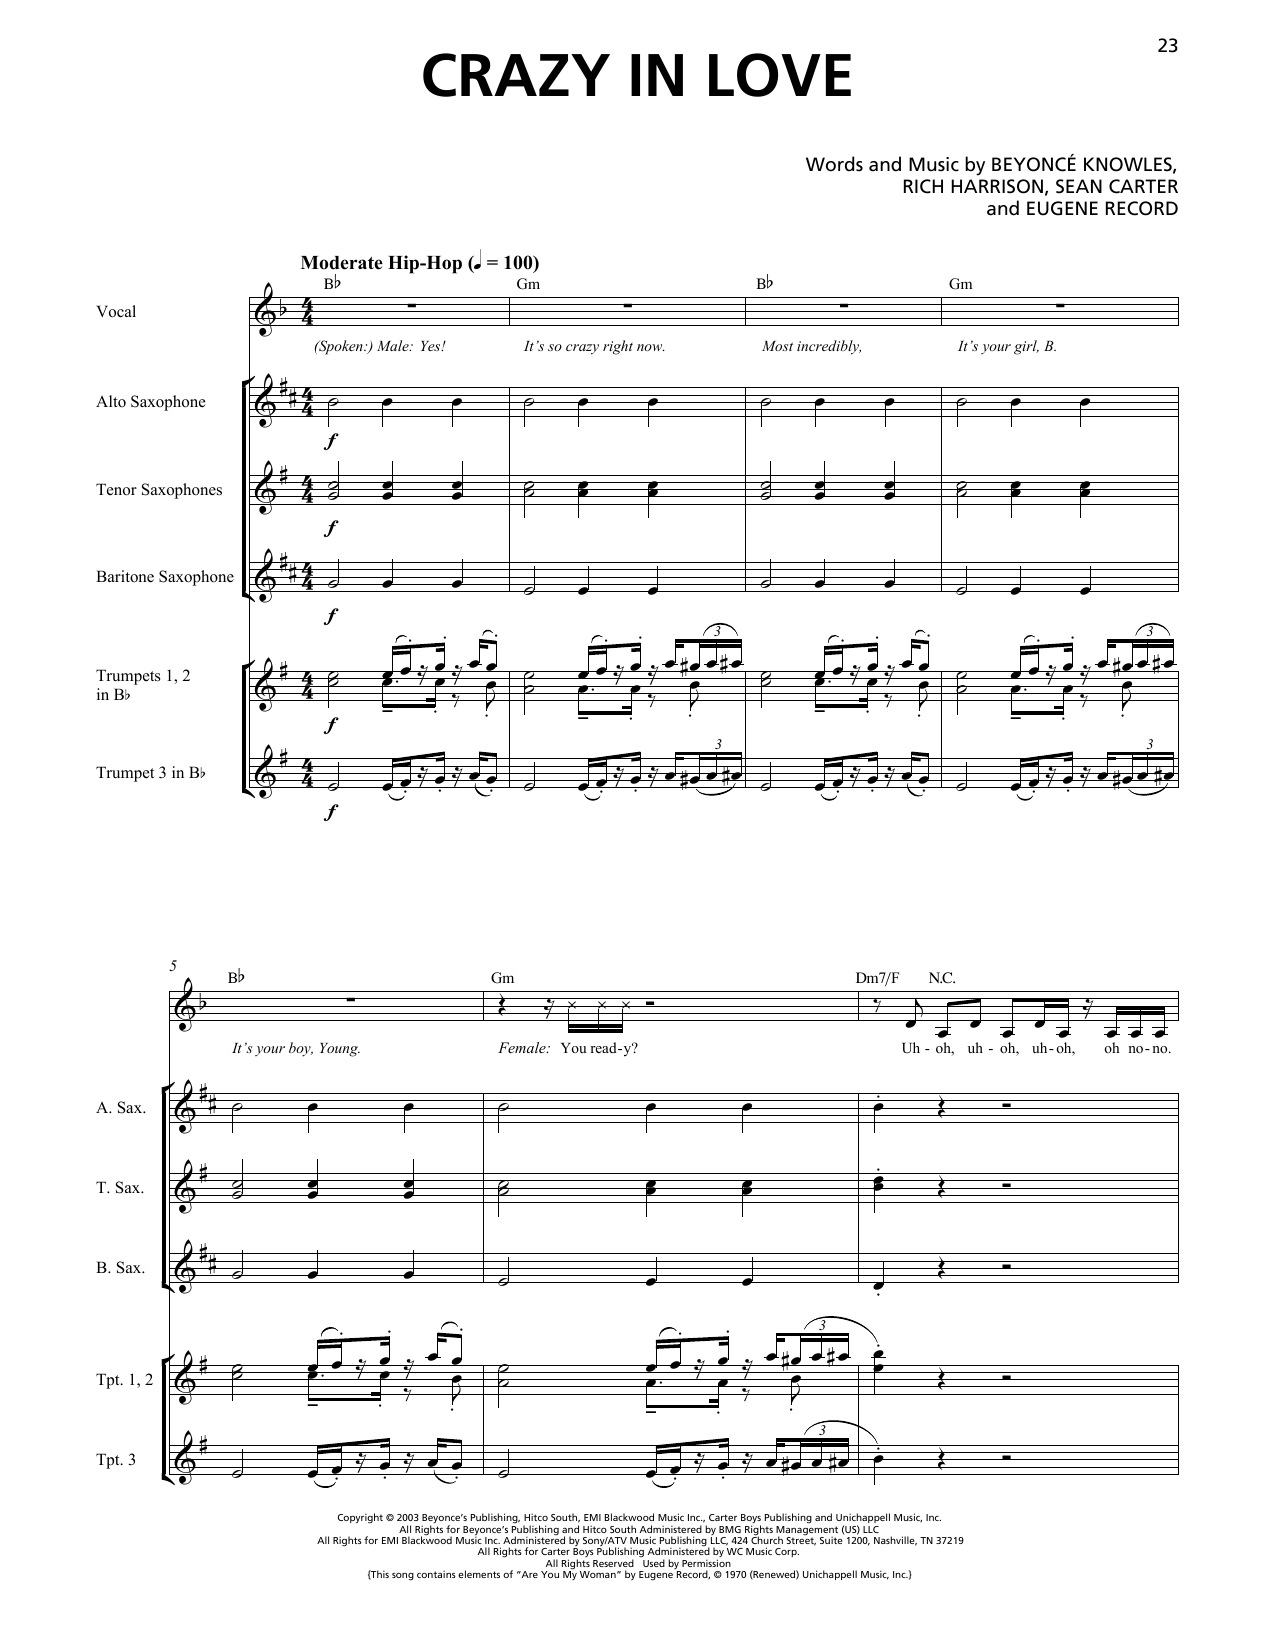 Beyoncé Crazy In Love (feat. Jay-Z) (Horn Section) sheet music notes and chords. Download Printable PDF.